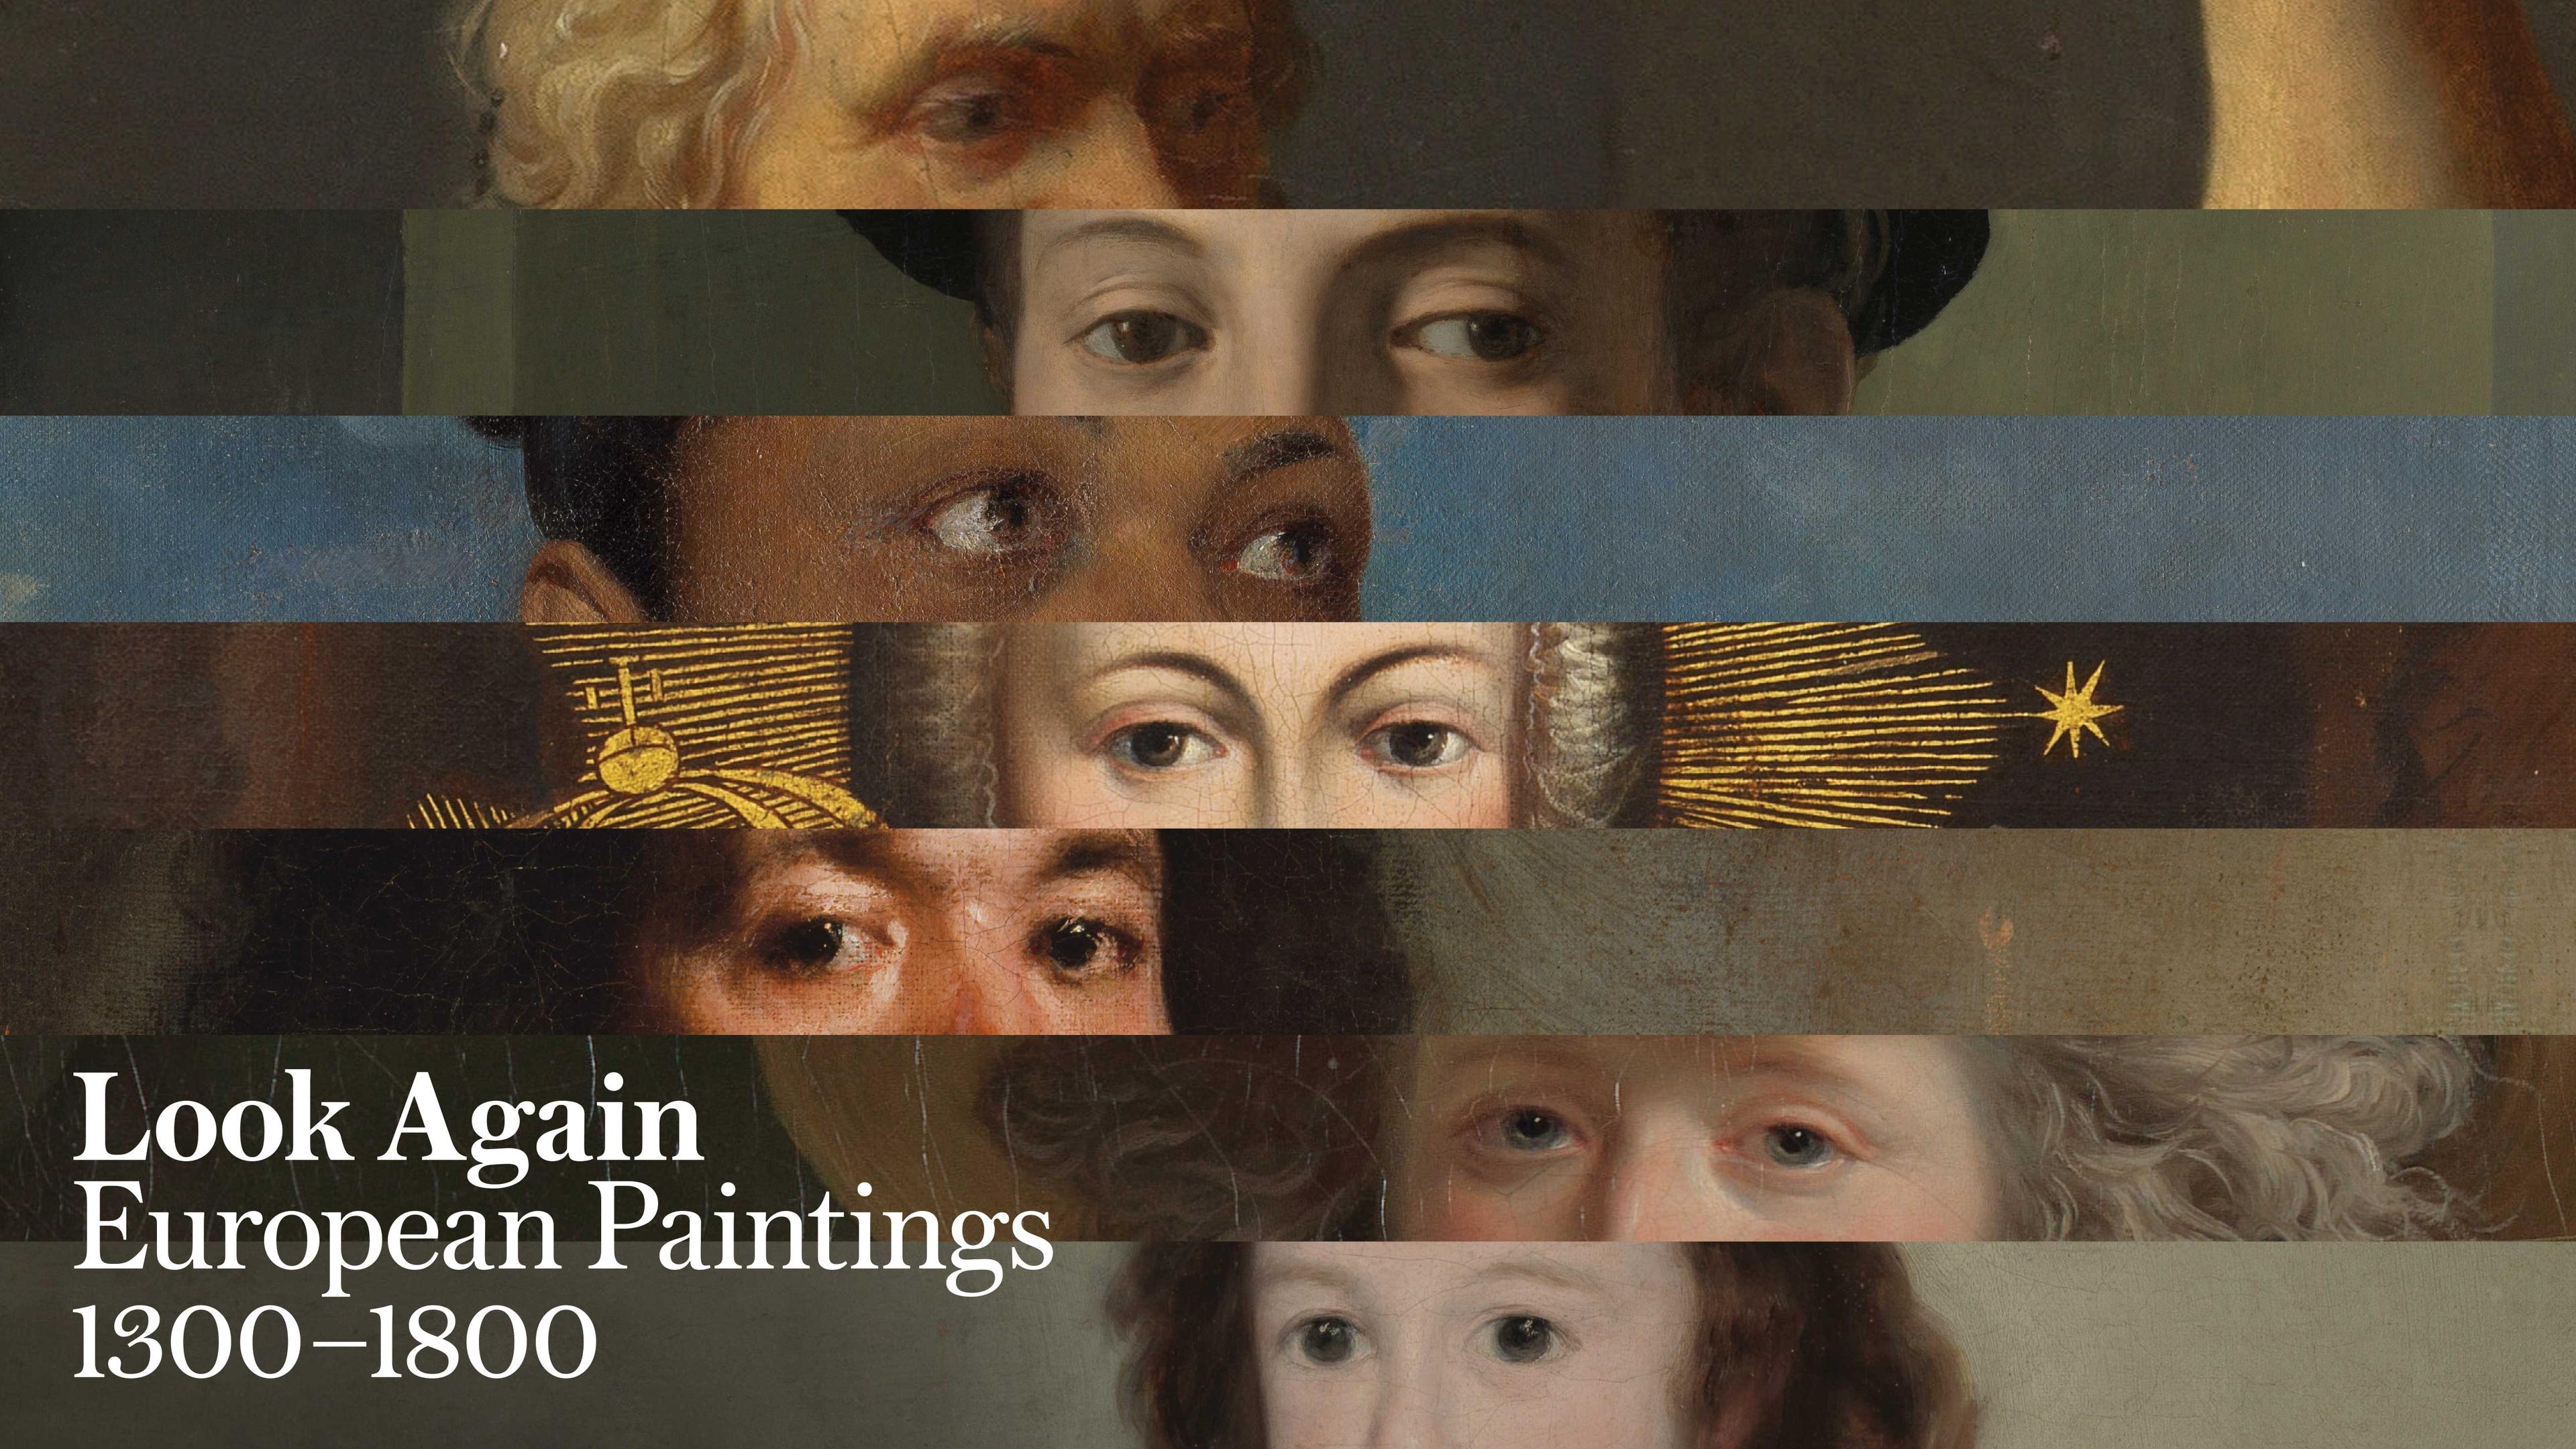 Graphic of seven distinct paintings, each composed of strips that reveal the eyes, with text overlay that says "Look Again: European Paintings 1300—1800"